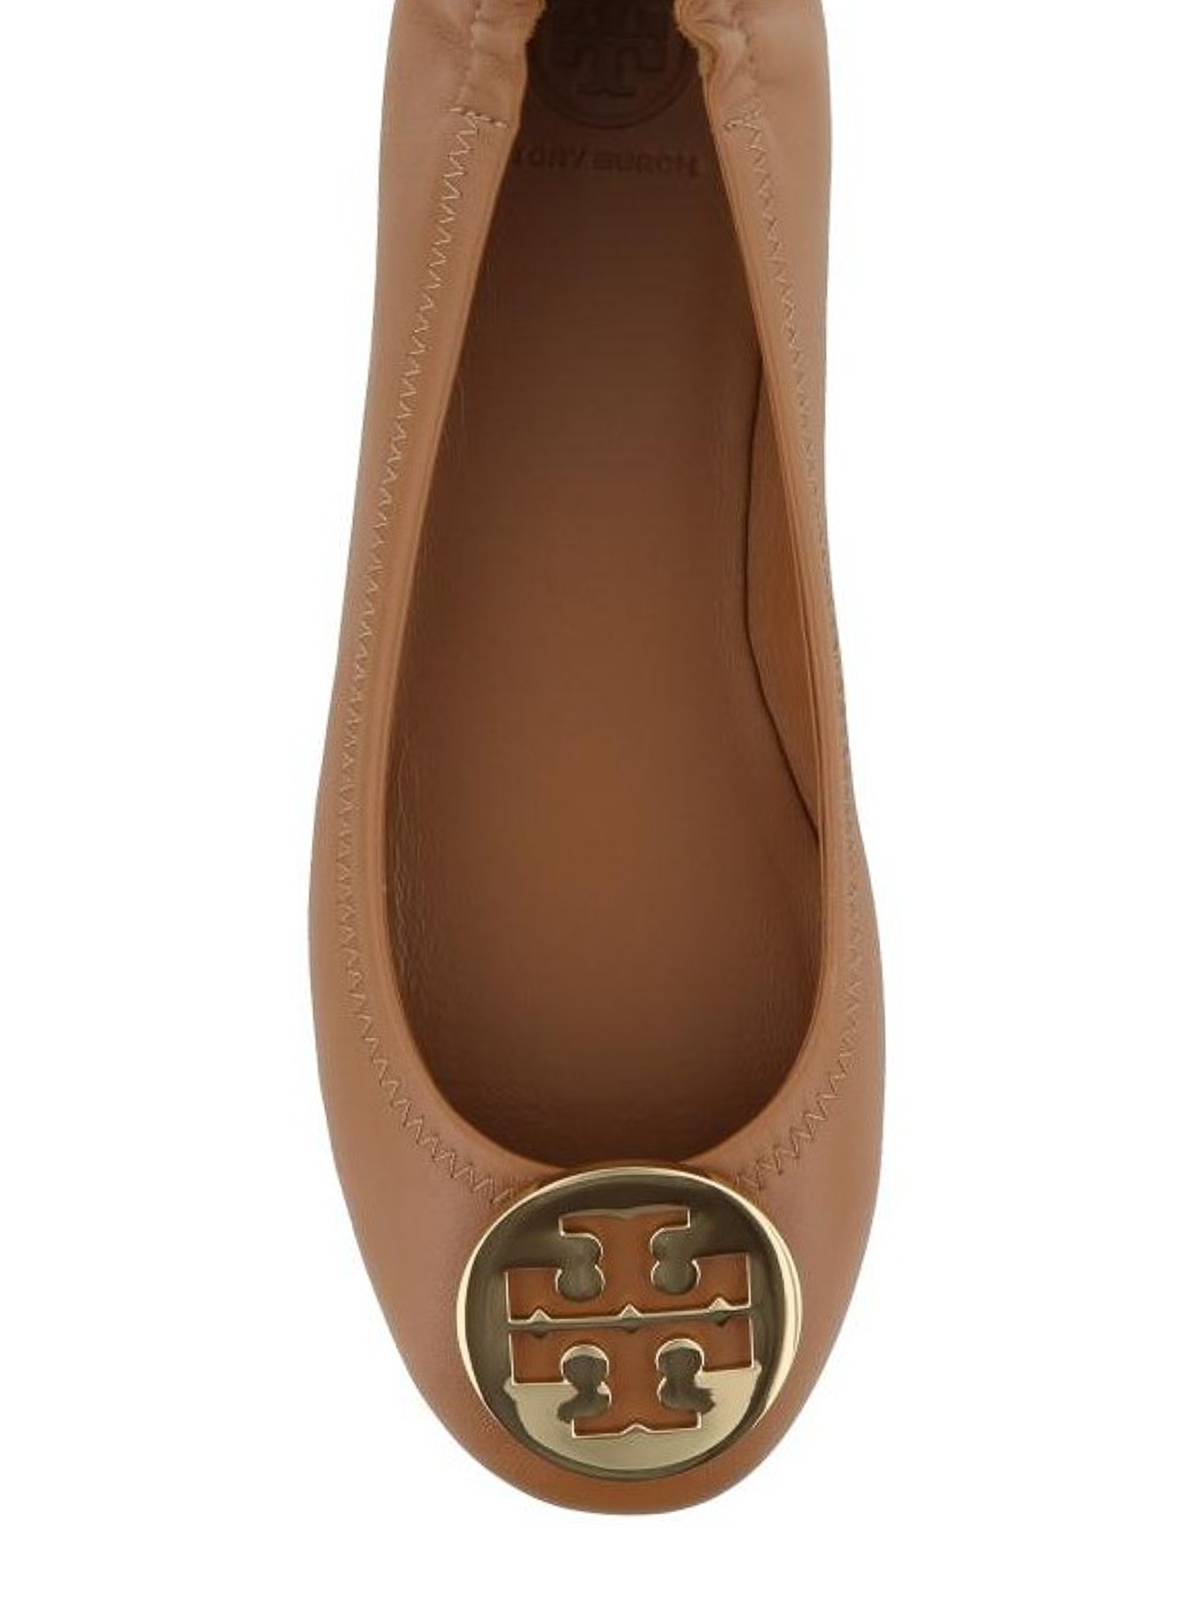 Buy > tory burch minnie travel ballet flat review > in stock